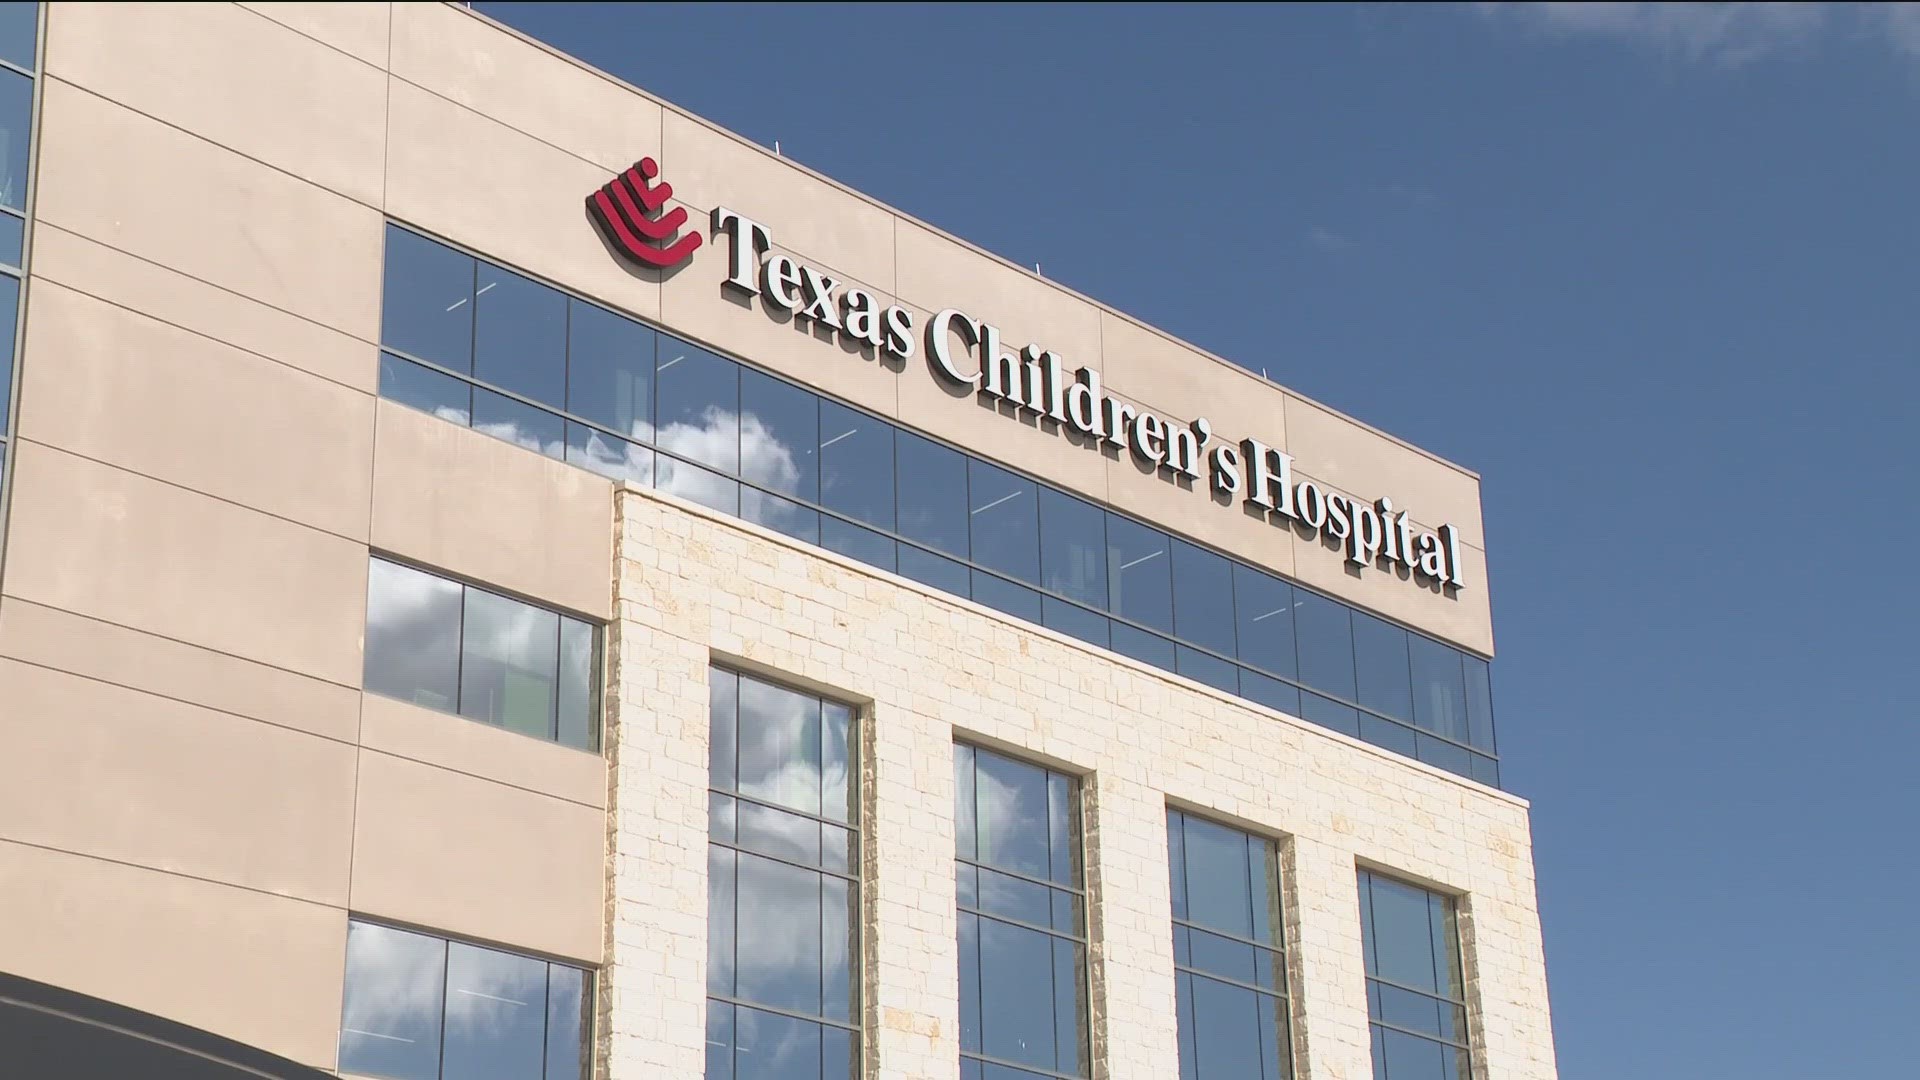 Officials with the hospital said the new campus will make specialty care more accessible for Austin-area children.